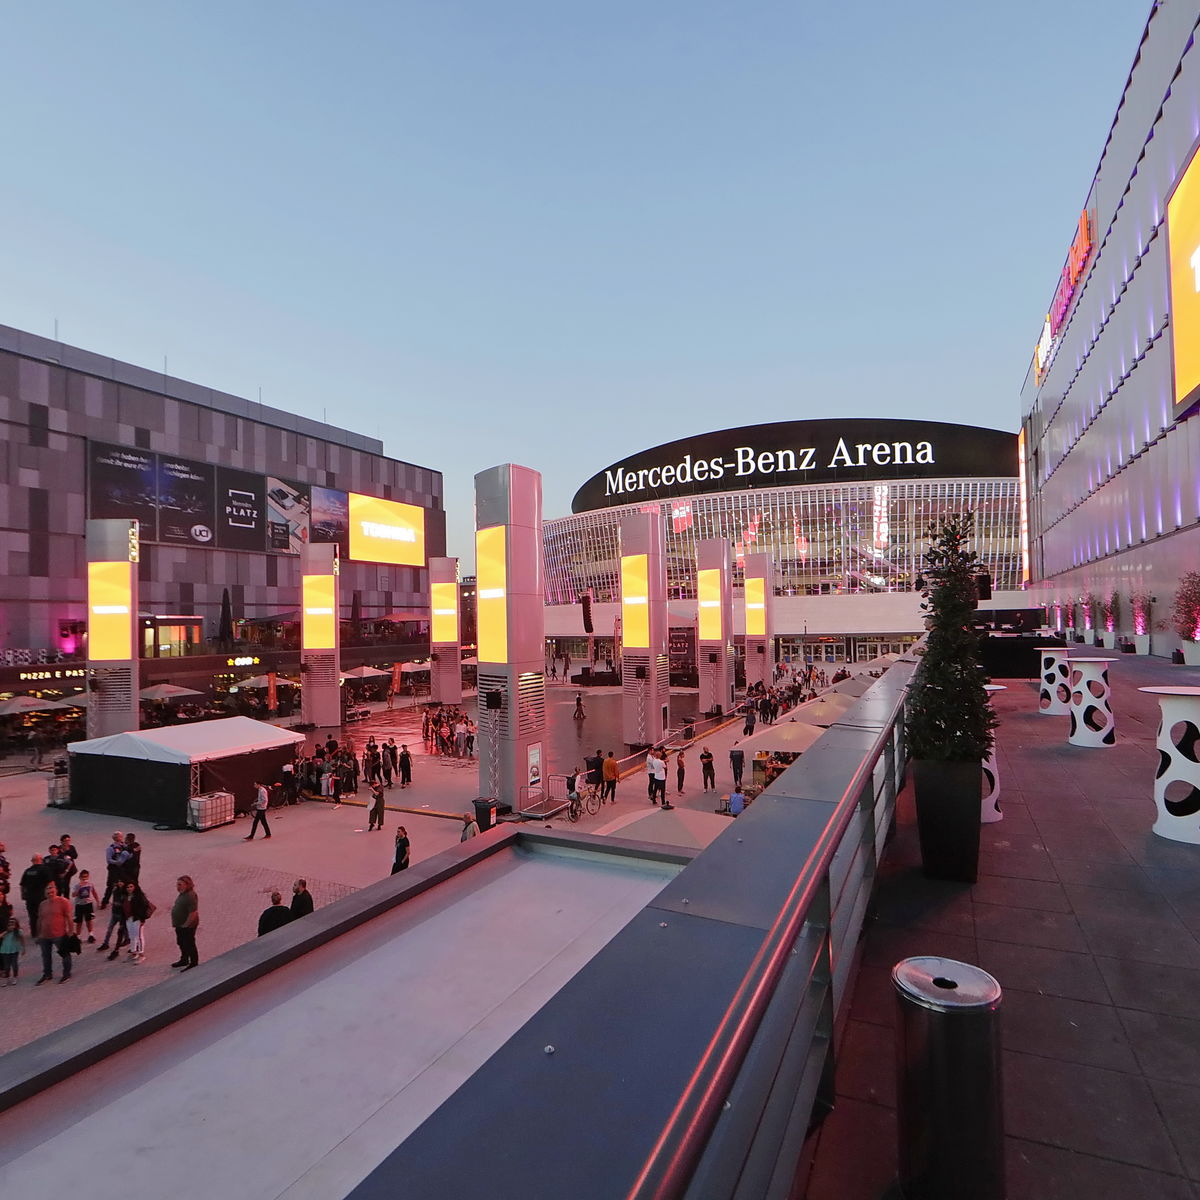 Exterior Image of Mercedes-Benz Arena and district at night